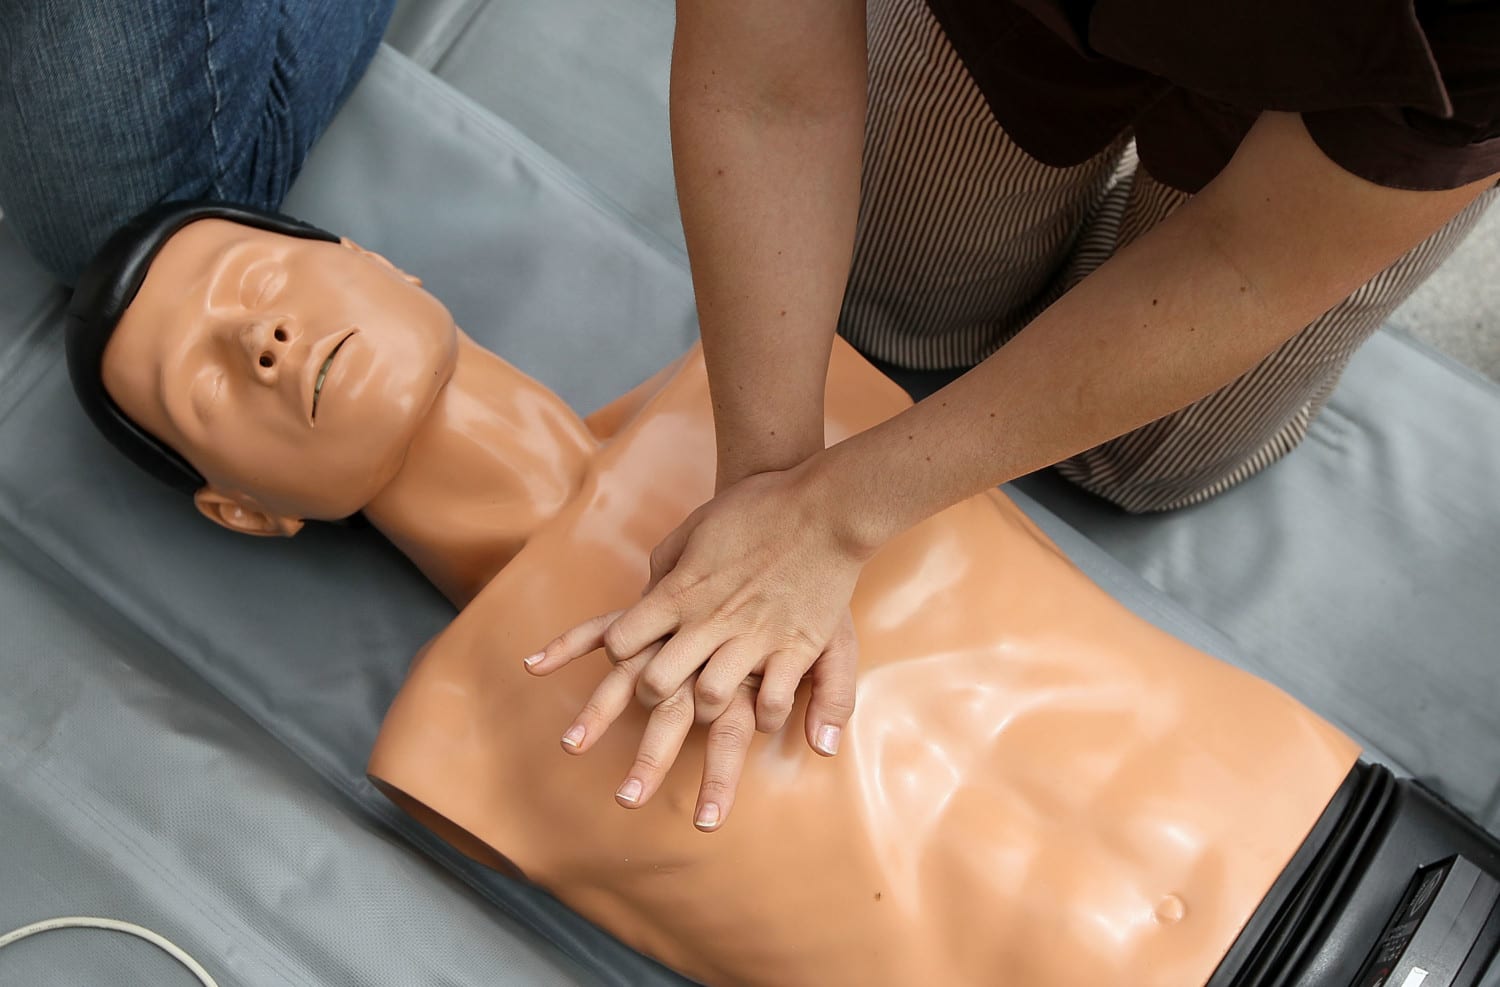 cpr photo